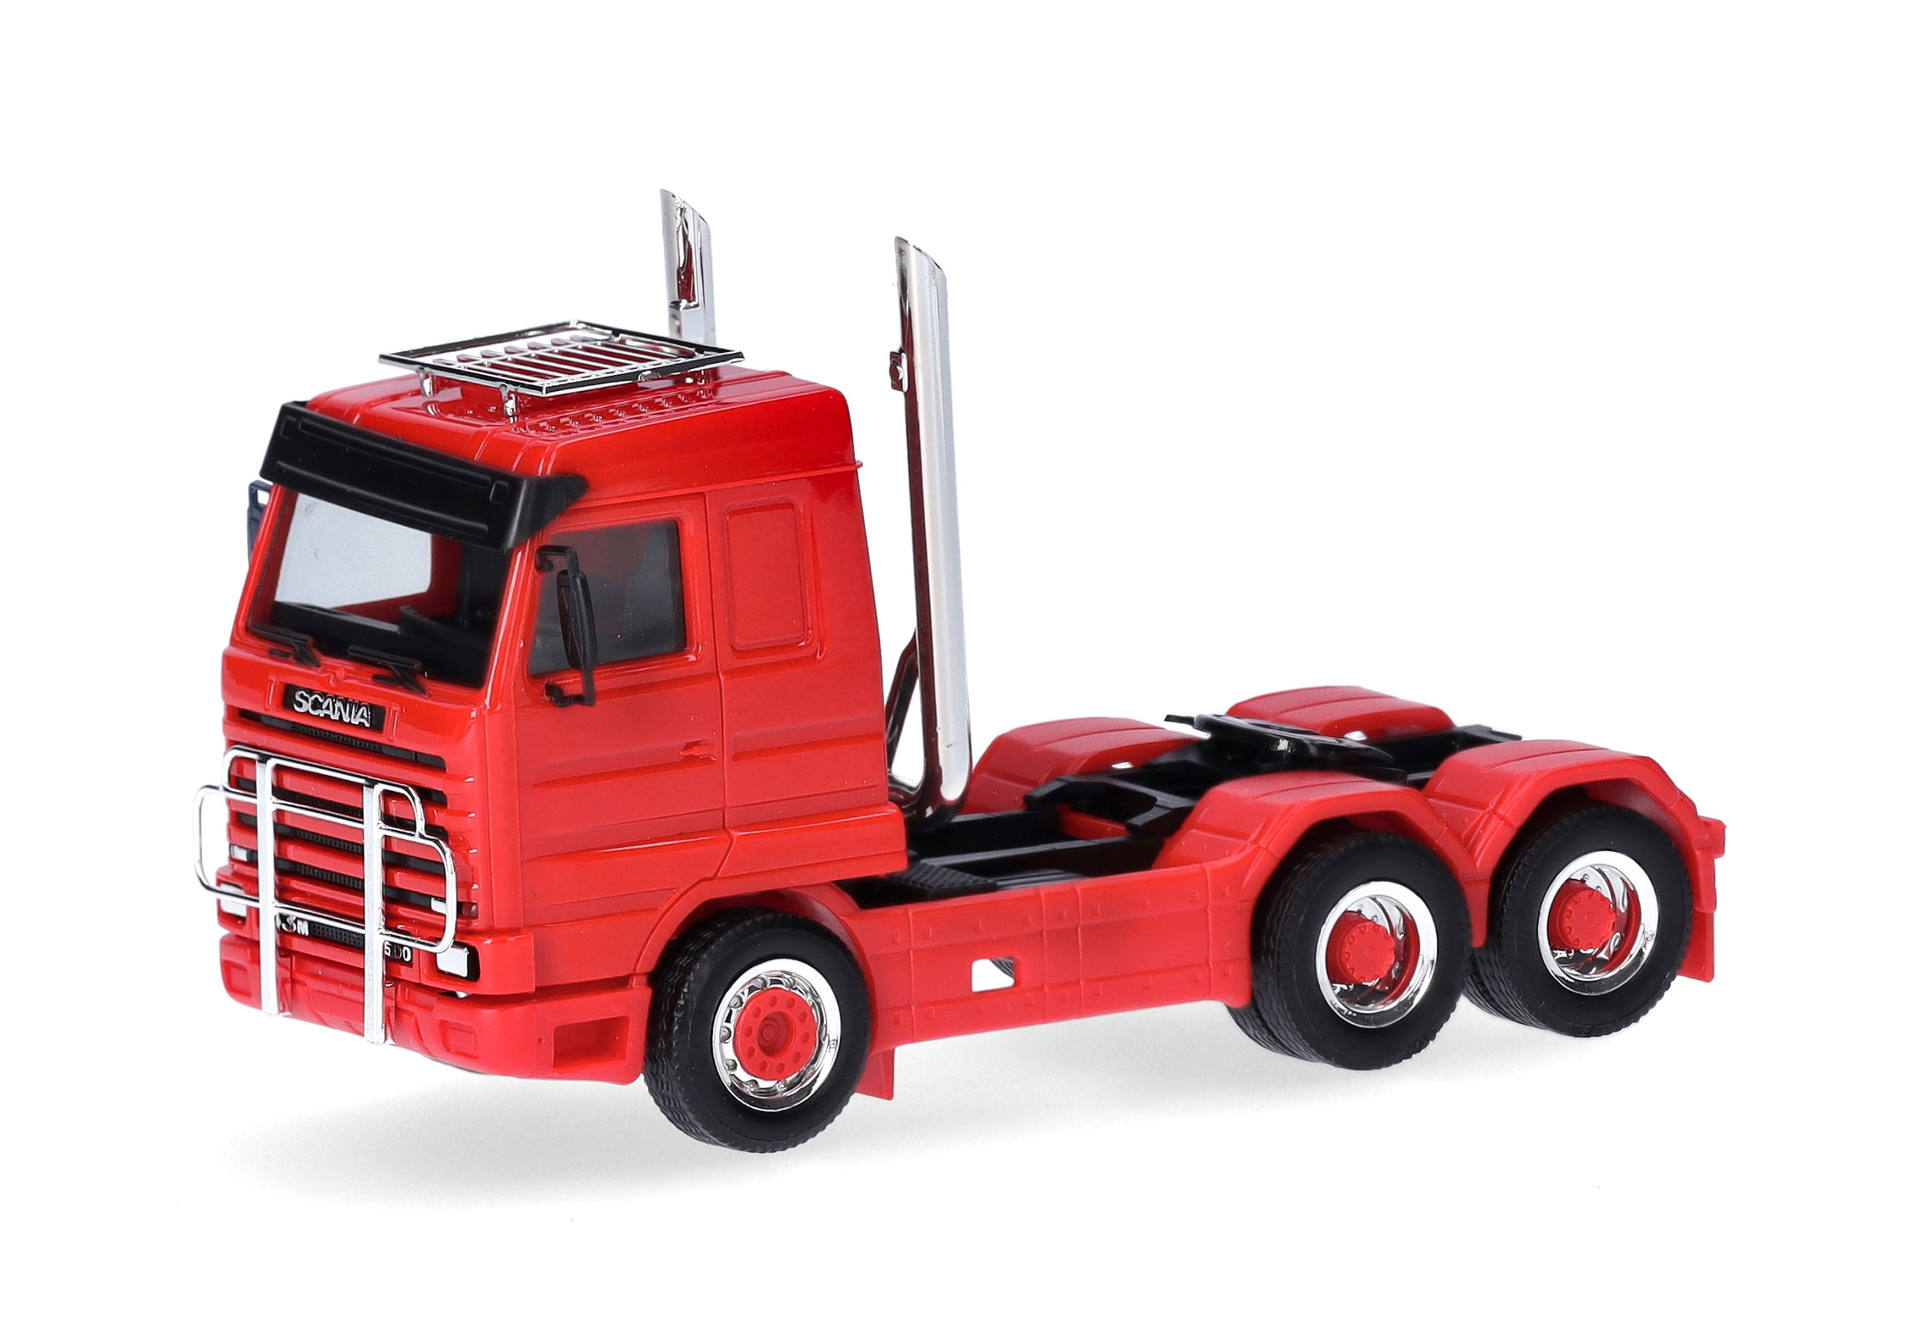 Scania 143 Streamline rigid tractor 3-axles (6x4) with roof rack, ram protection and Highpipes, red